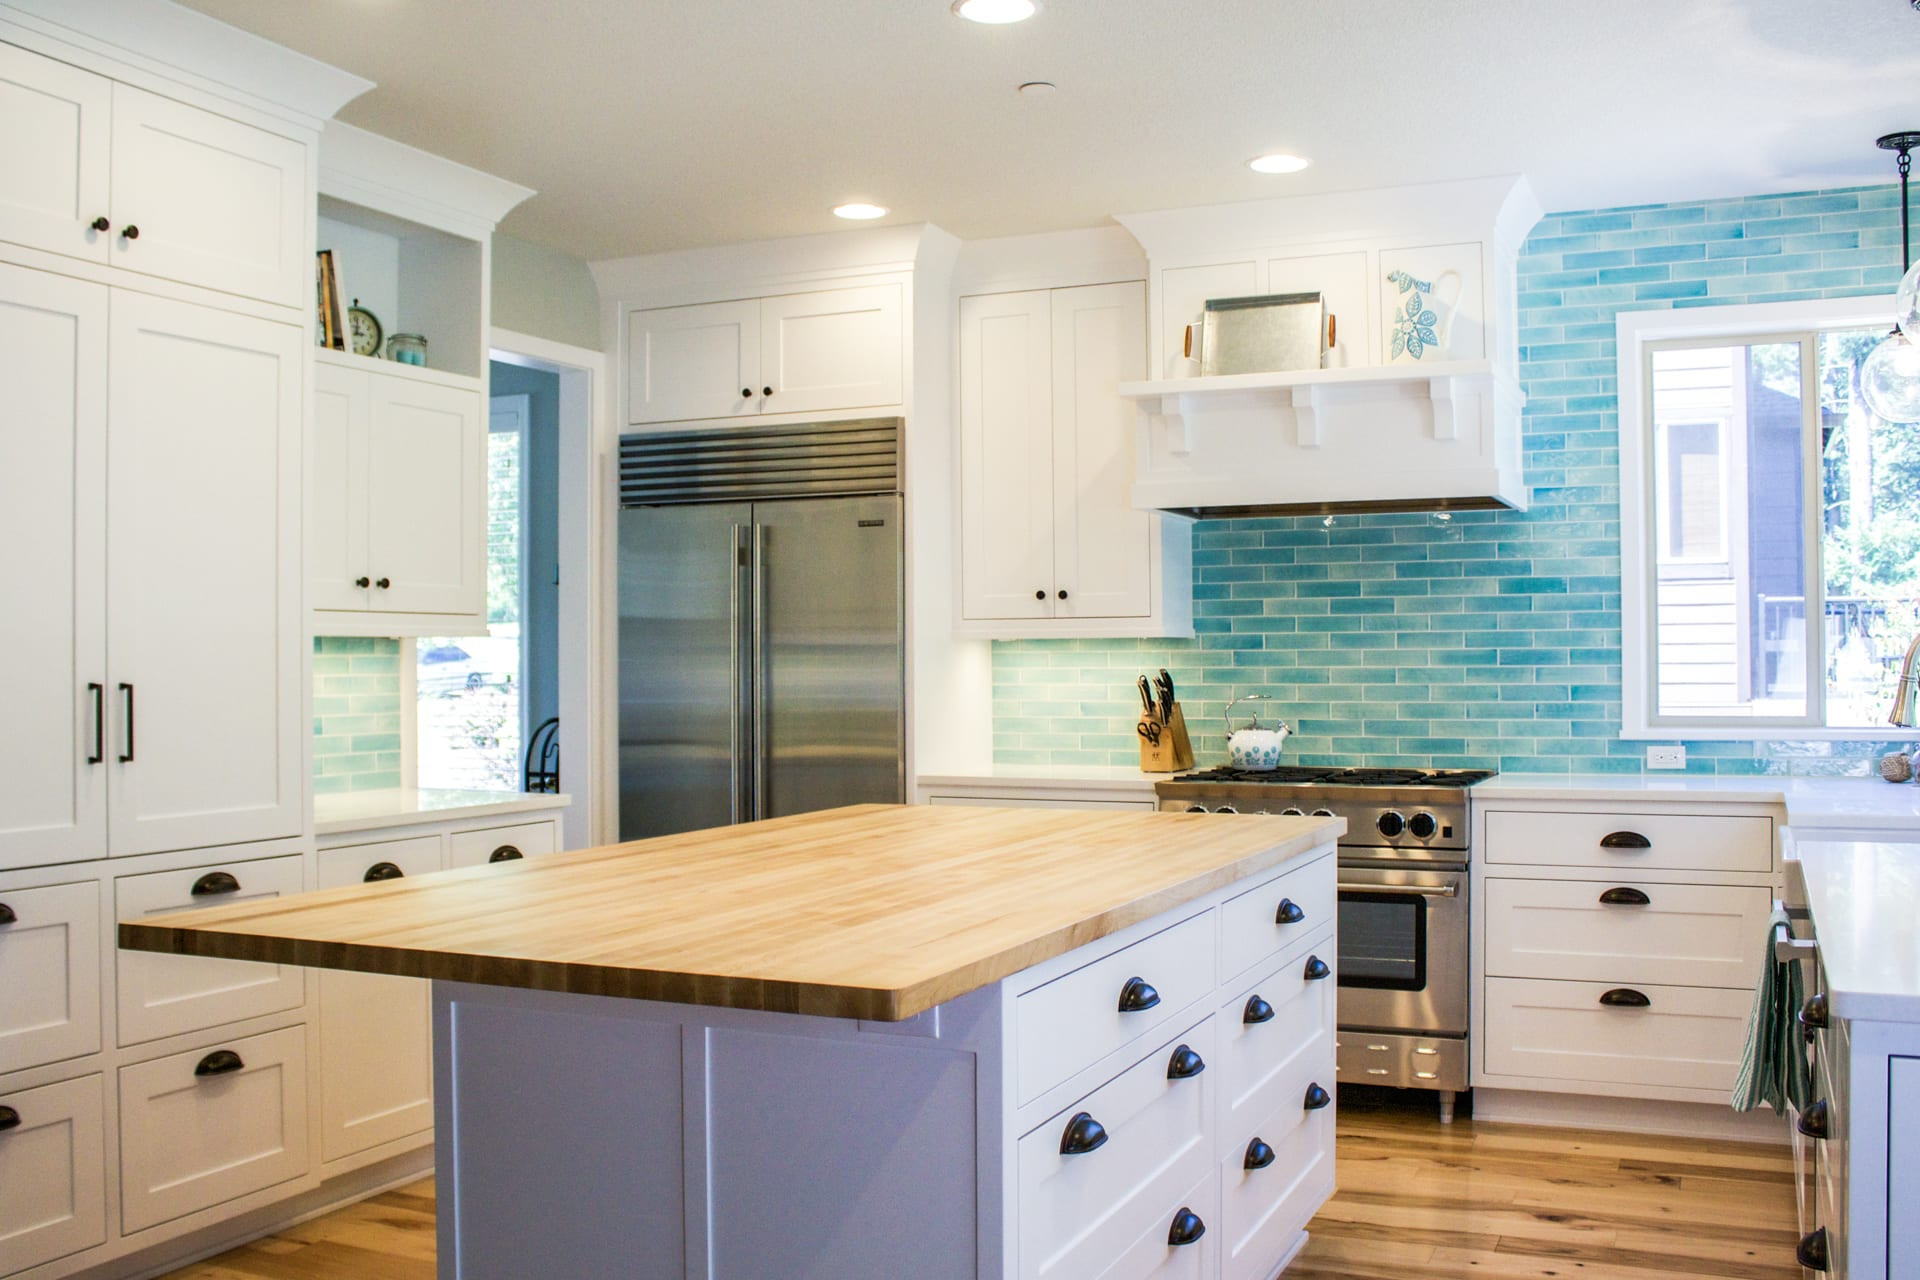 Blue Kitchen Tile
 Custom designed kitchen with white cabinets and bold blue